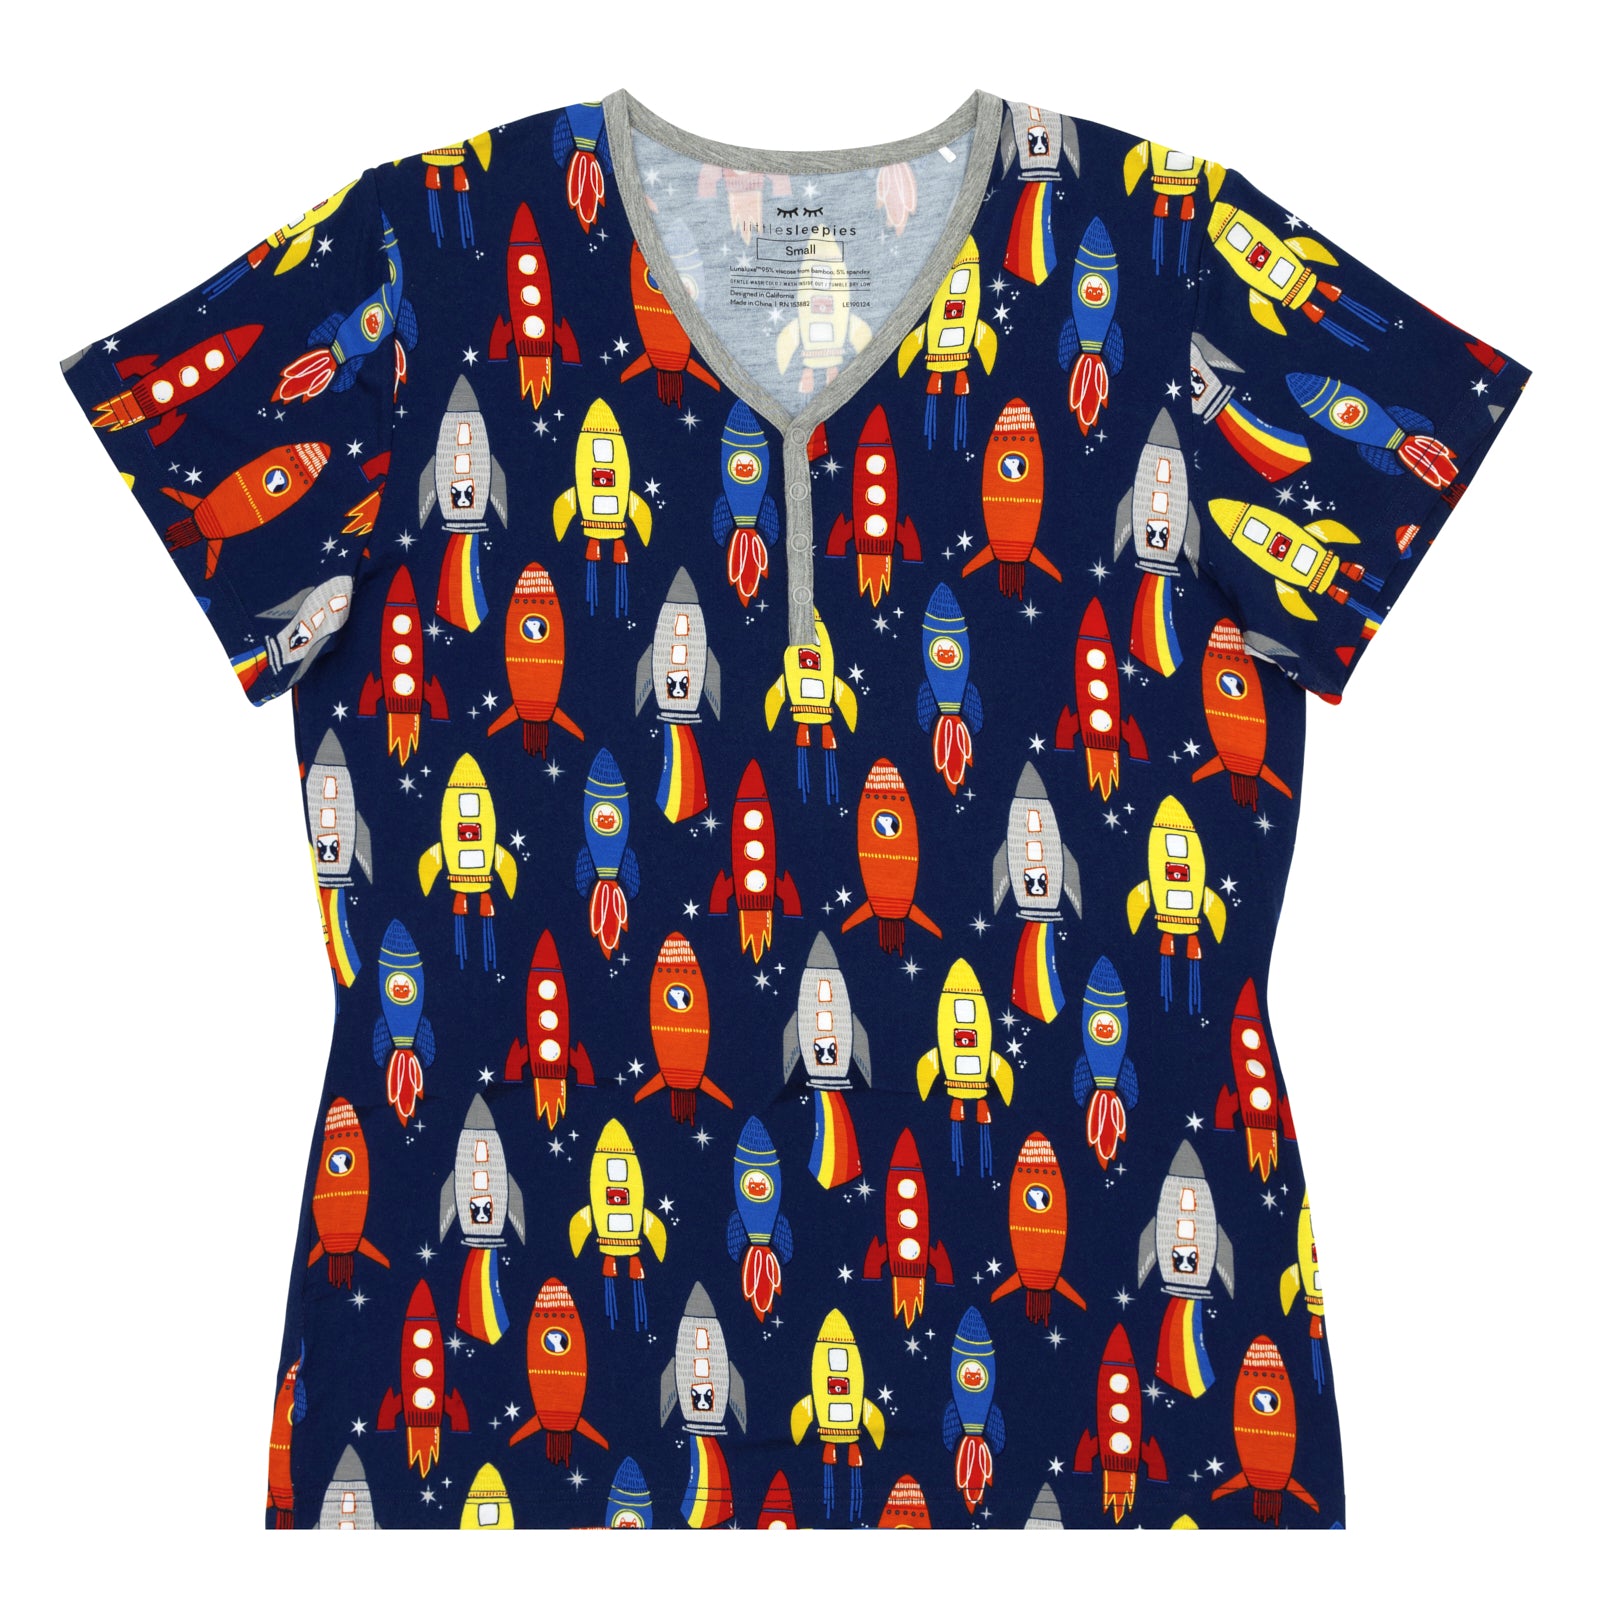 Flat lay image of a women's Navy Space Explorer short sleeve pajama top